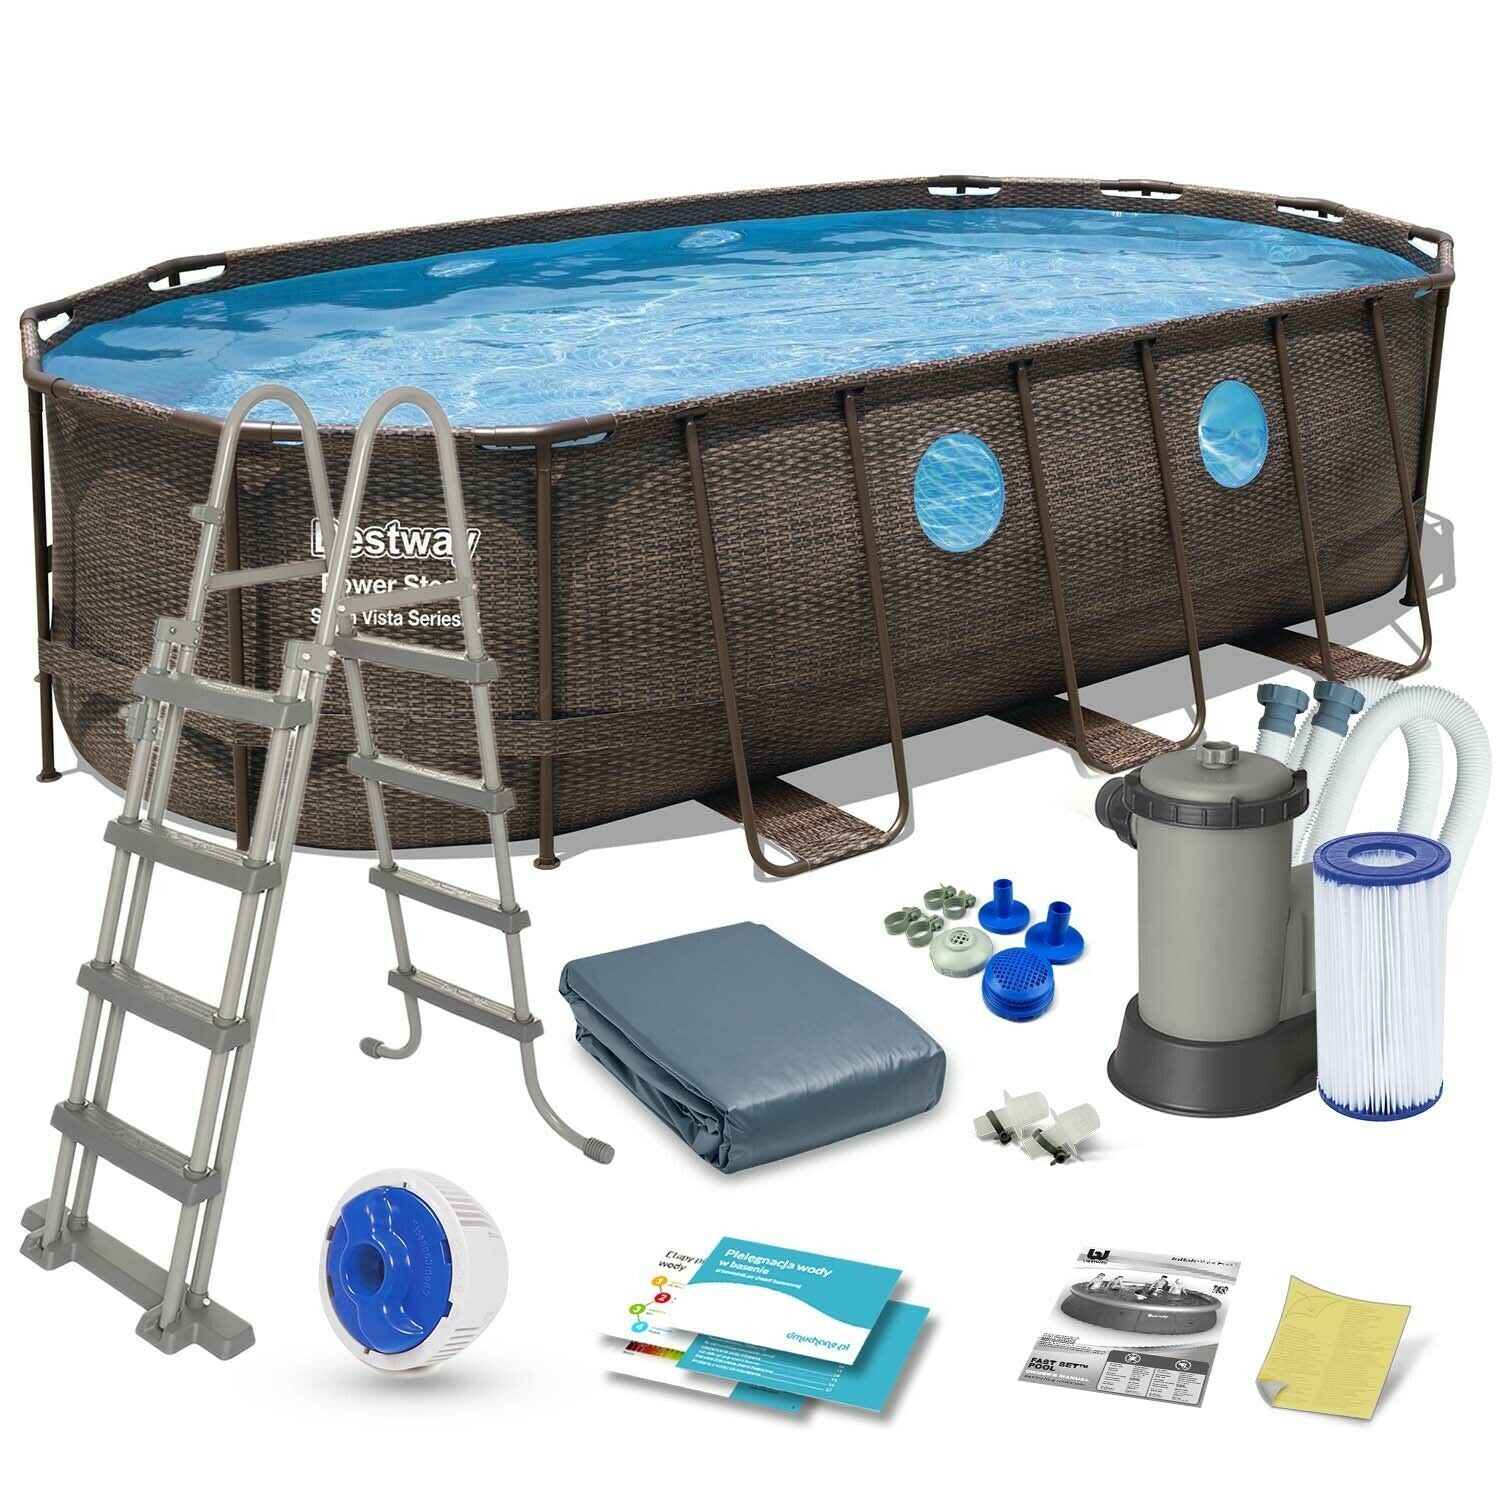 Bestway Power Steel Swim Vista Series 18Ft X 9Ft X 48In Oval Pool With –  MyHappy Baby